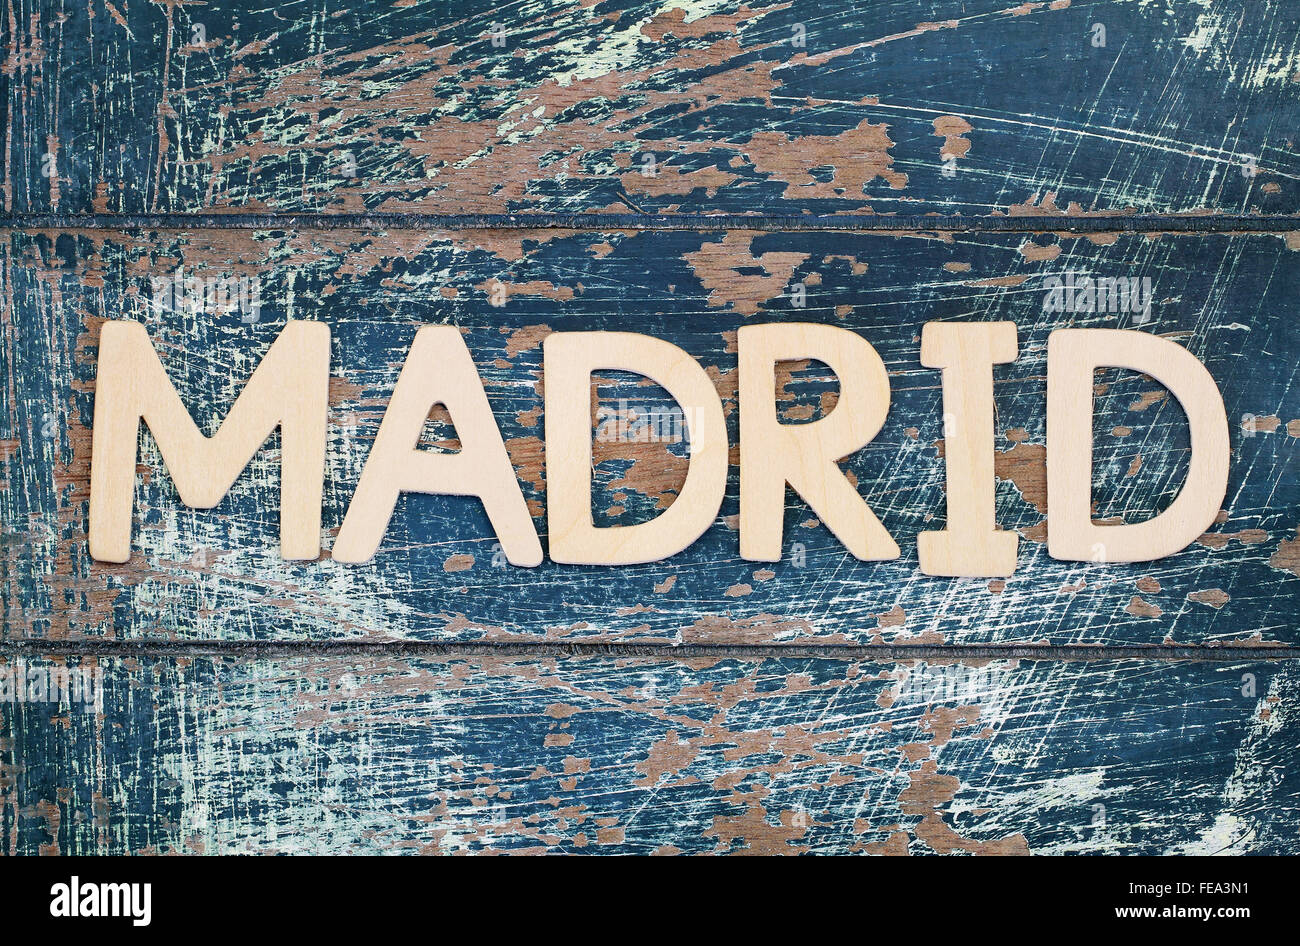 Madrid written with wooden letters on rustic surface Stock Photo